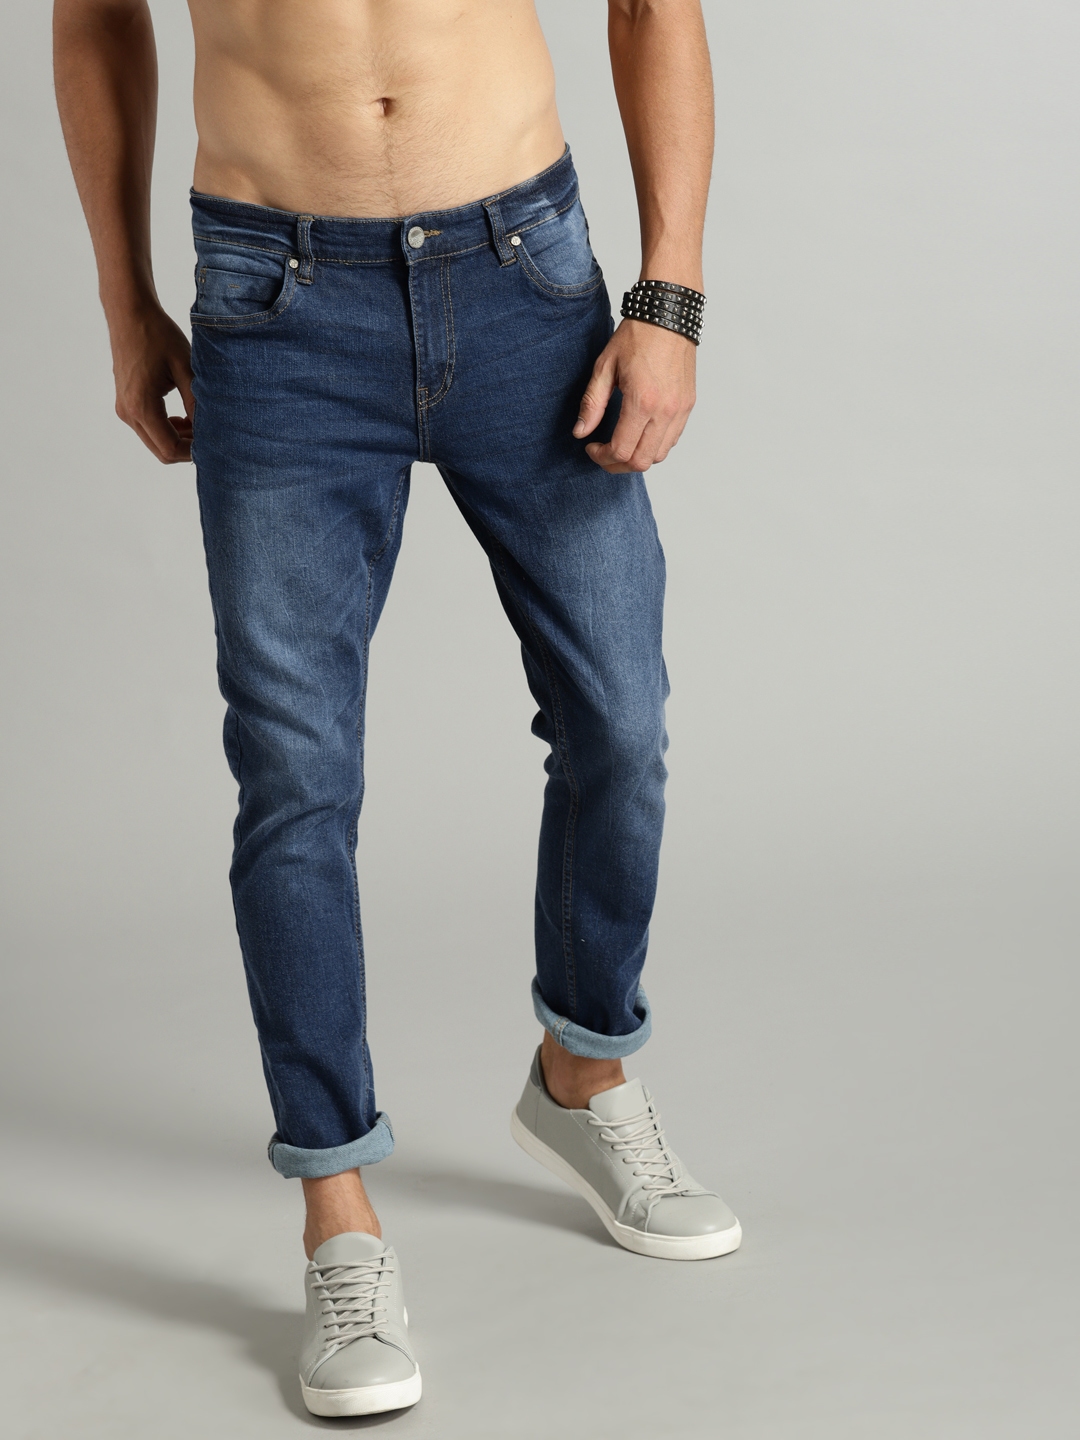 roadster jeans for mens